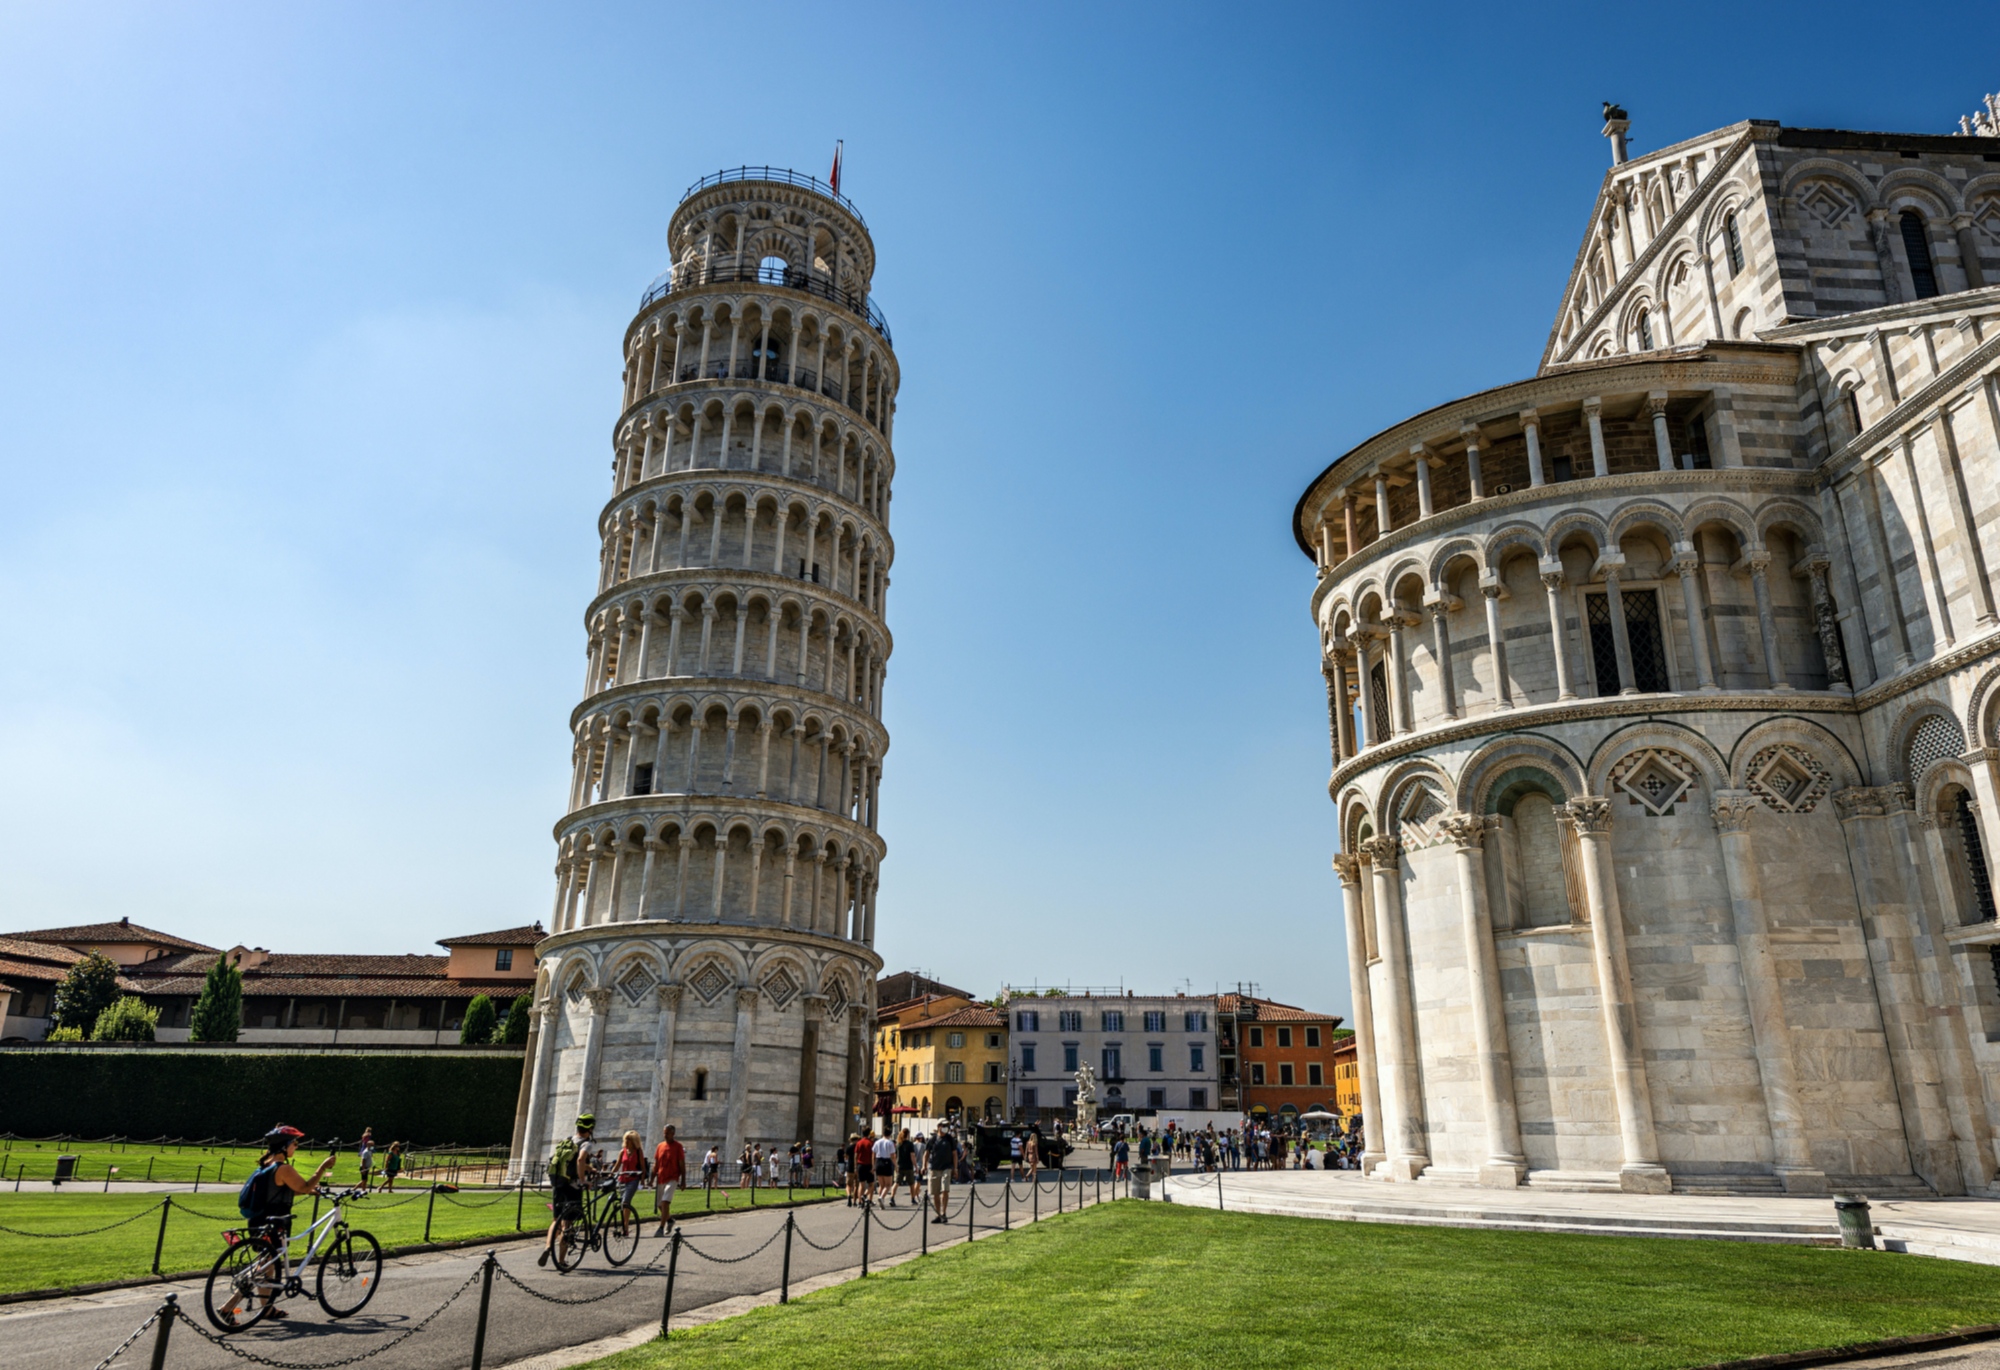 From Lucca to Pisa e-bike tour with lunch